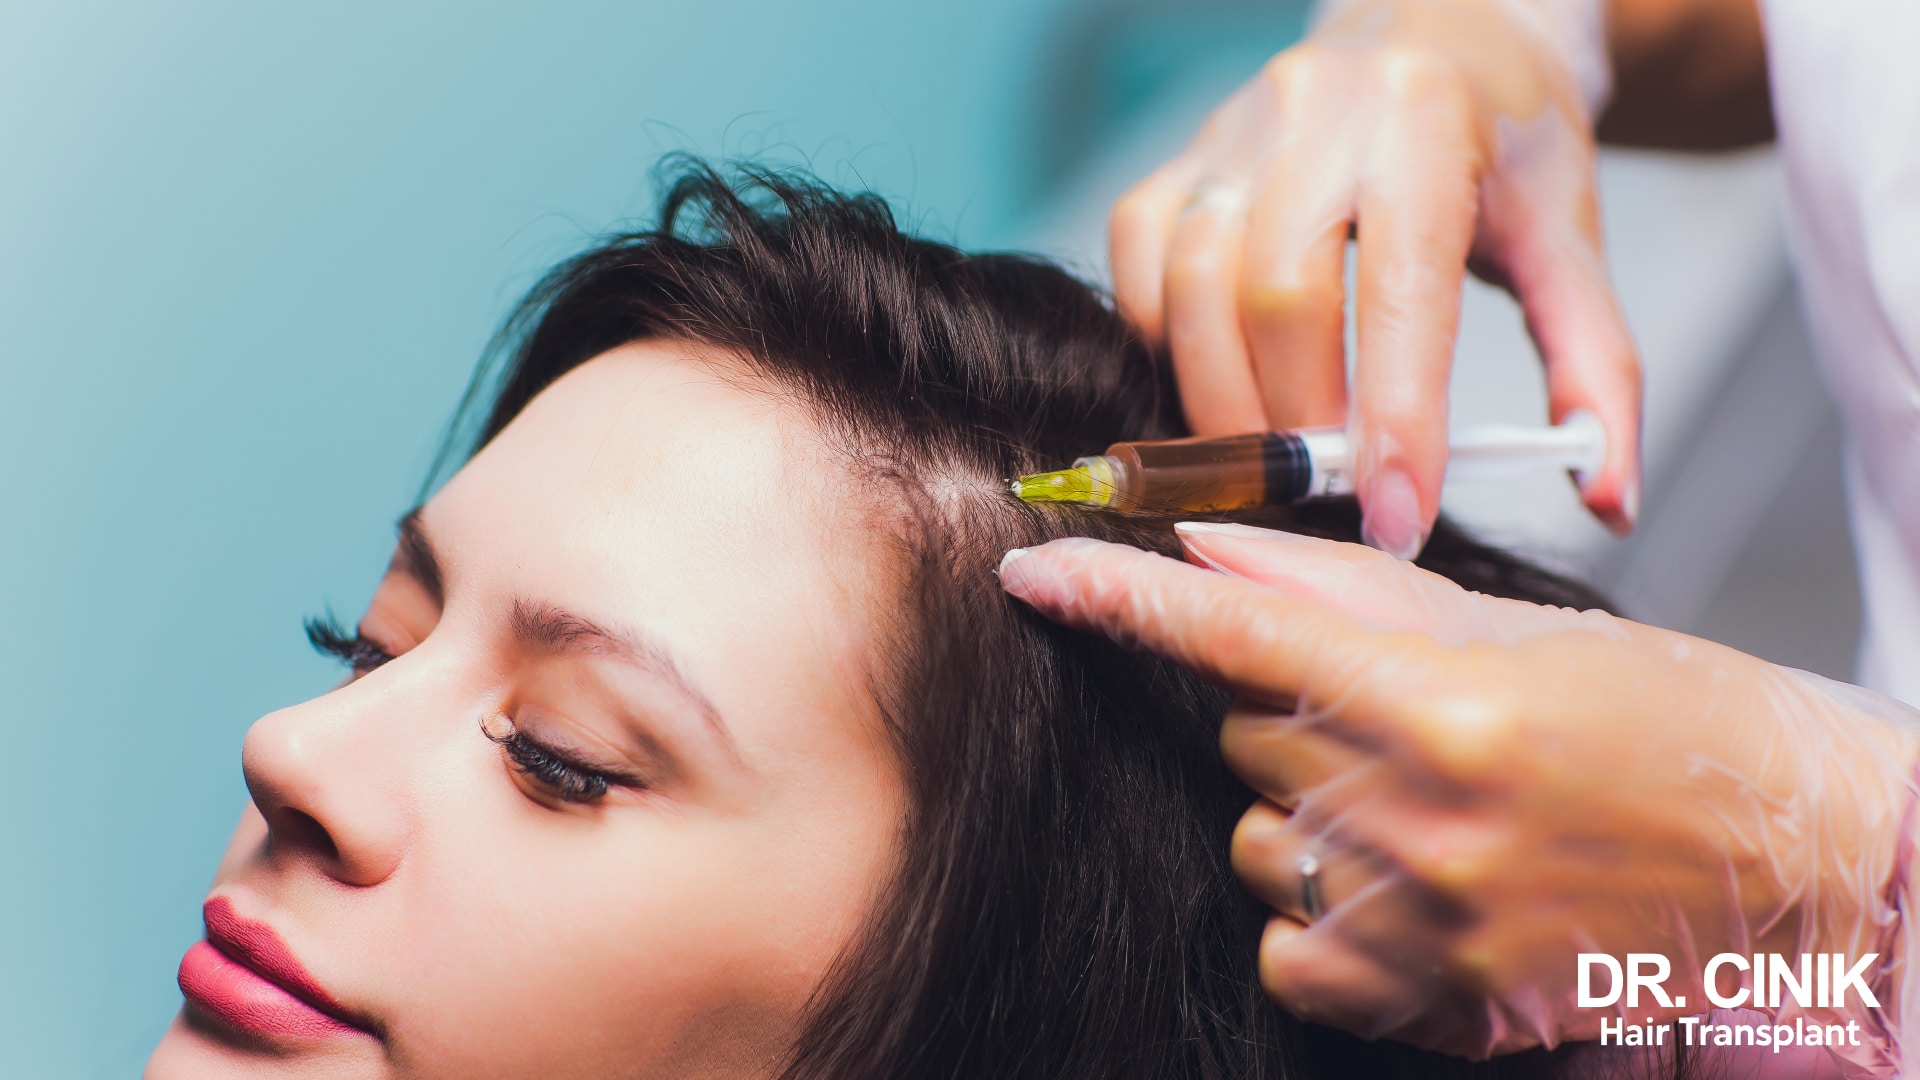 A woman is undergoing Platelet-Rich Plasma (PRP) therapy, a treatment designed to enhance hair growth